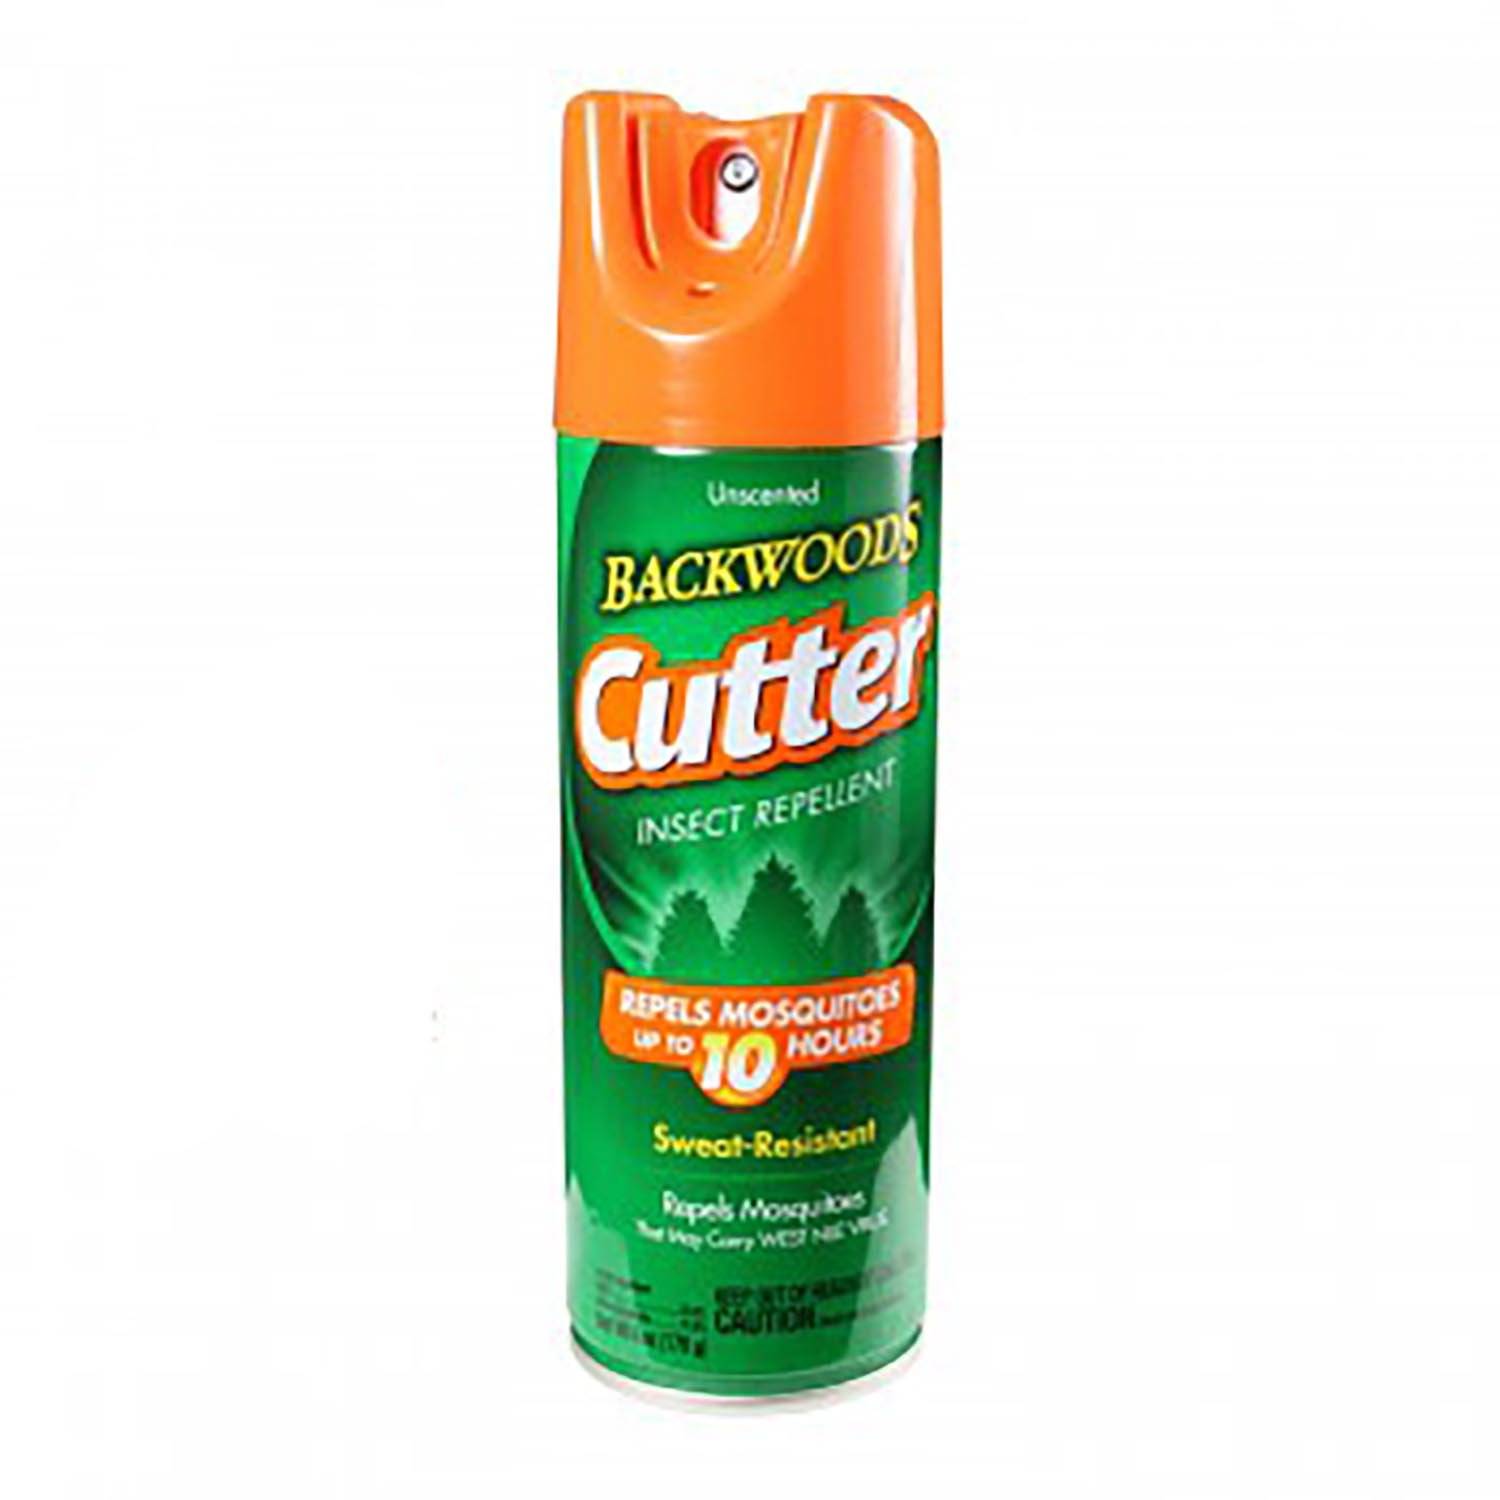 Rothco Cutter Unscented Backwoods Insect Repellent